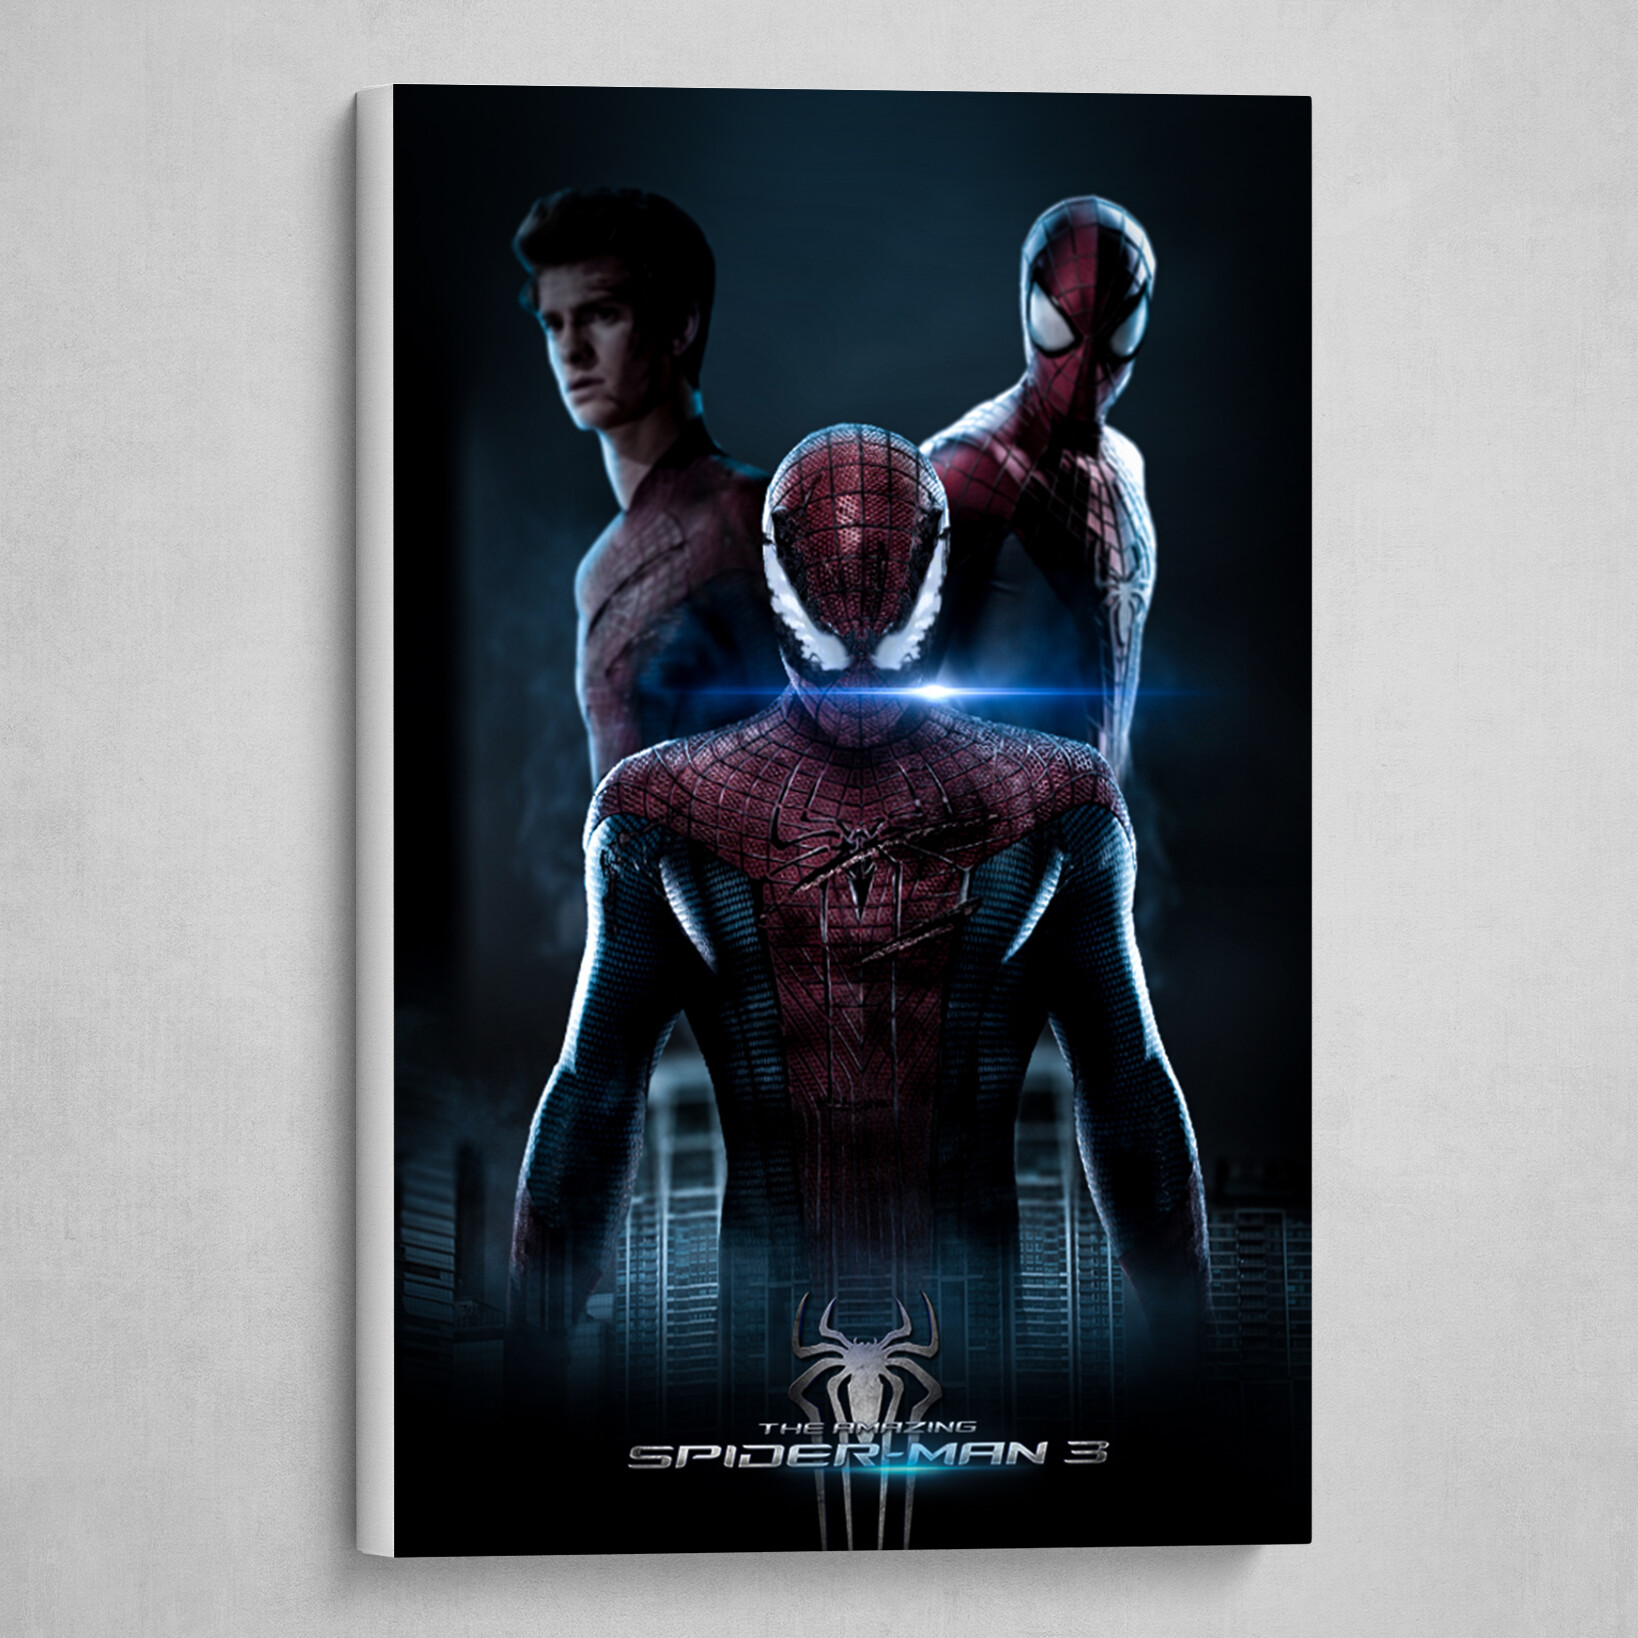 The Amazing Spider-man 3 Concept Poster